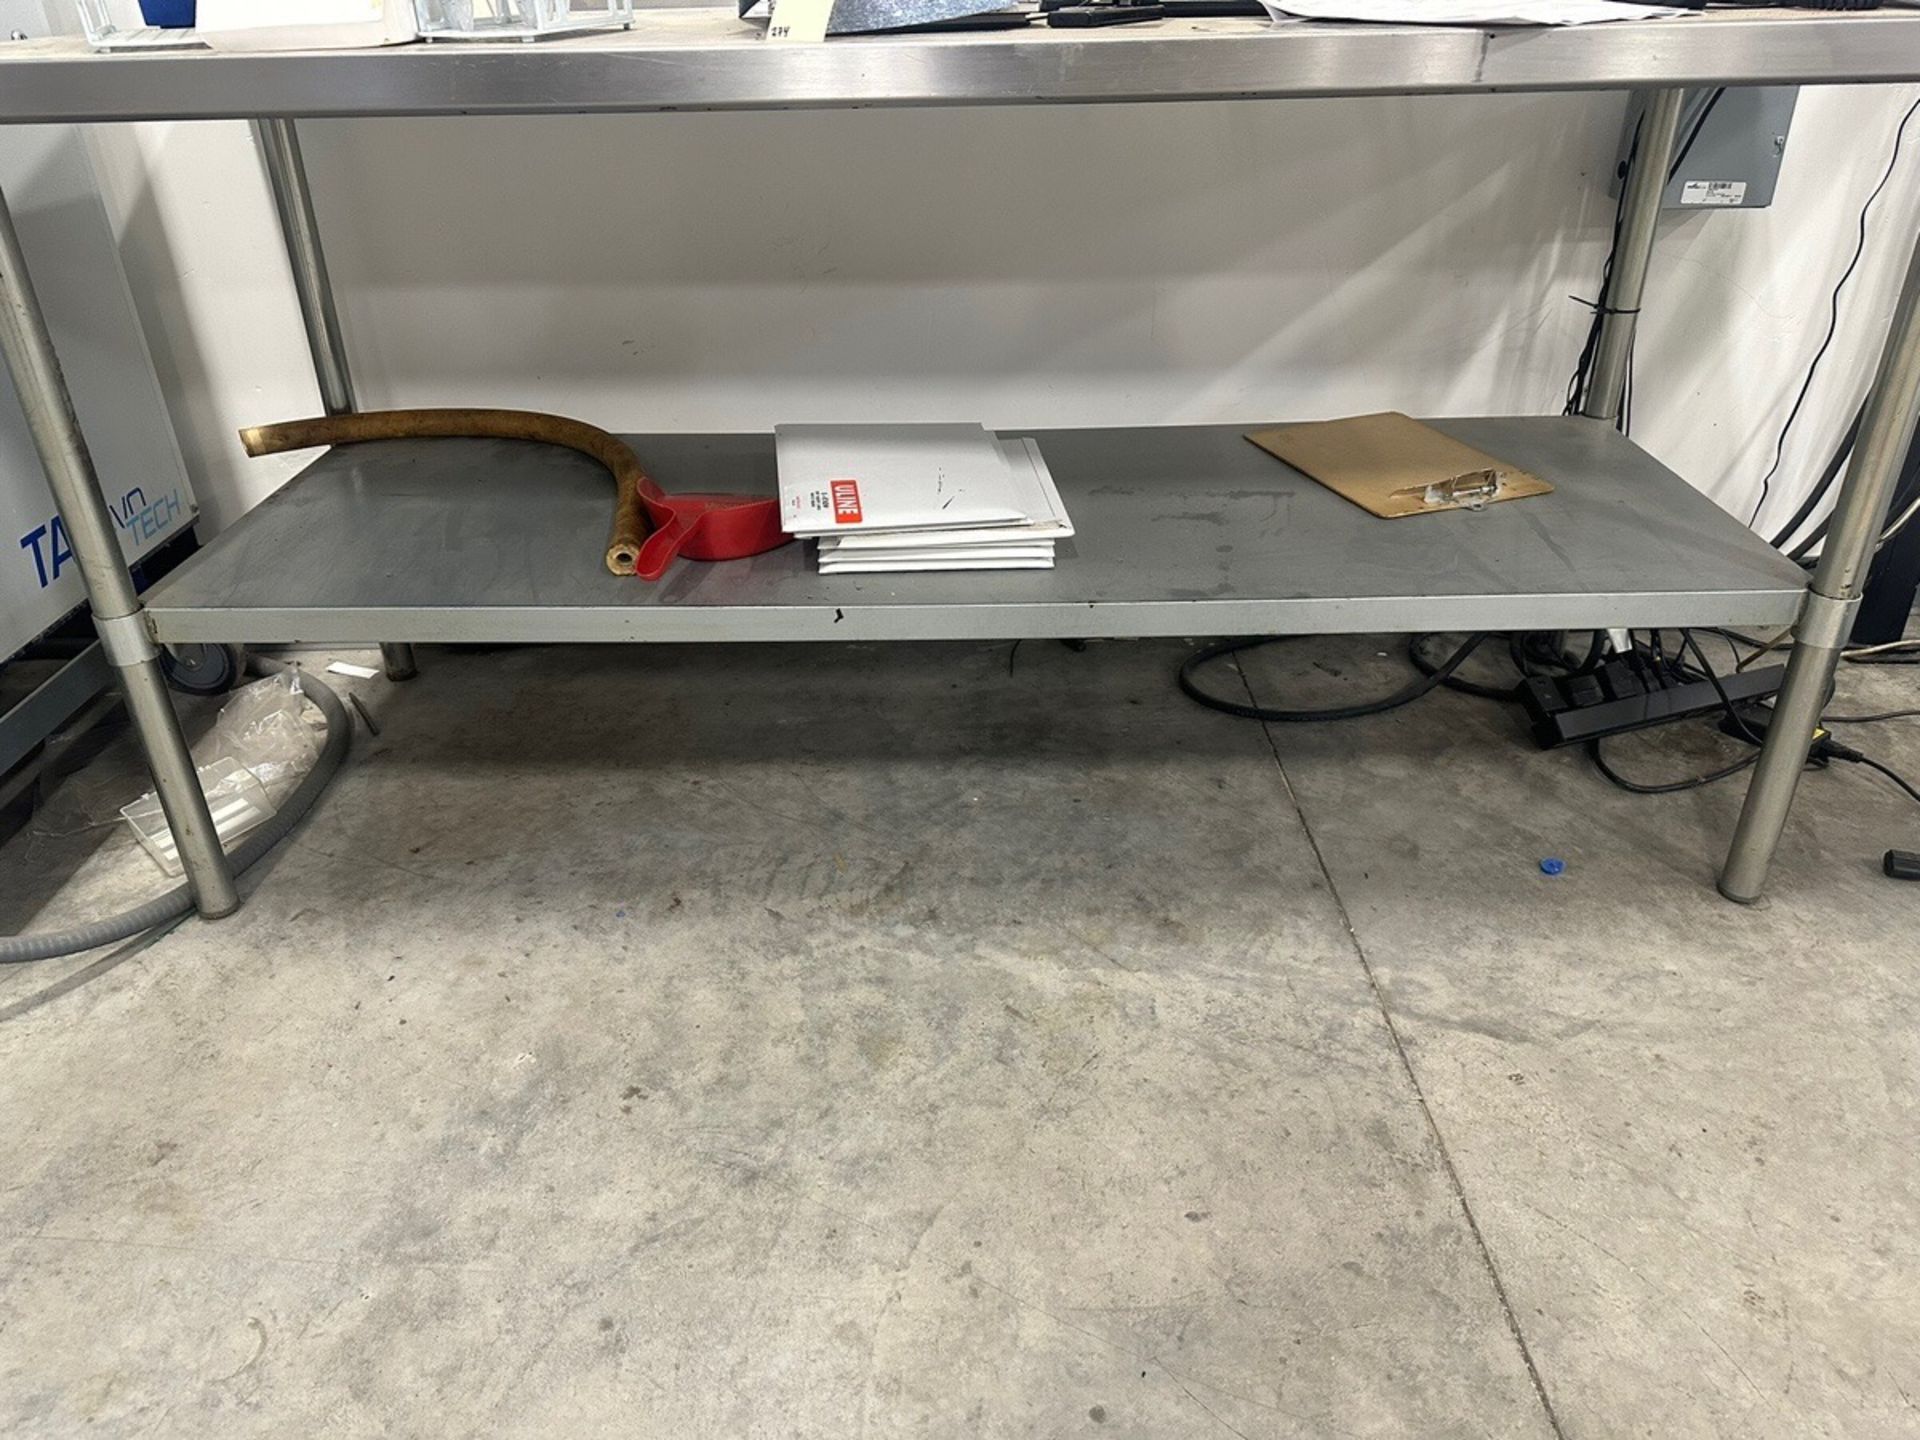 Stainless Steel Table With Work Station Contents | Rig Fee $35 - Image 2 of 5